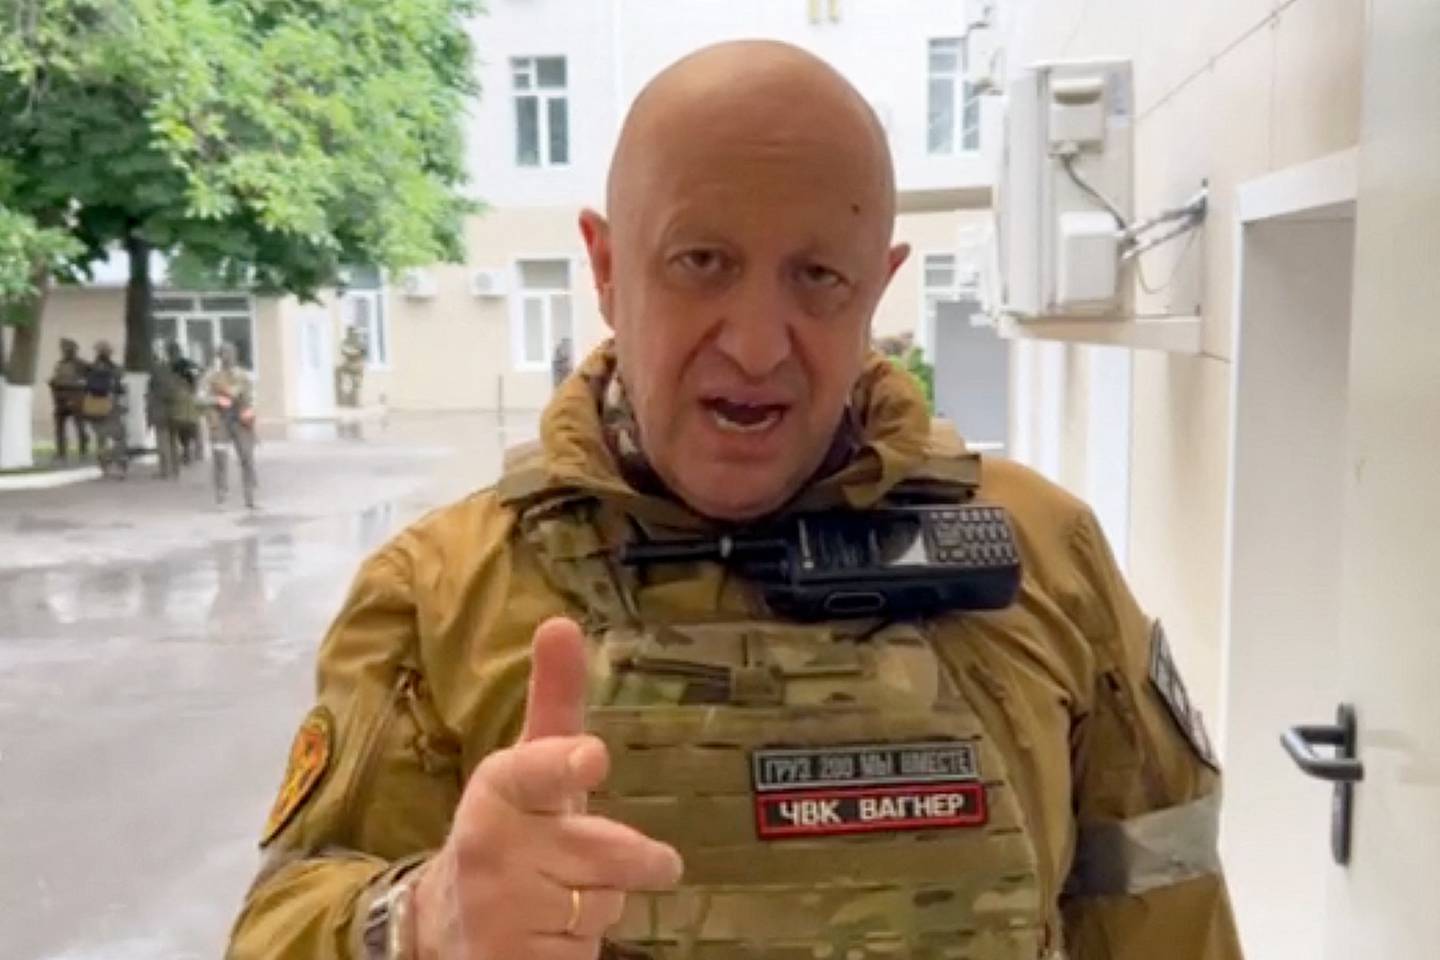 This is a screenshot taken on Saturday, June 24, of Yevgeny Prigozhin at the military headquarters in Rostov-on-Don.